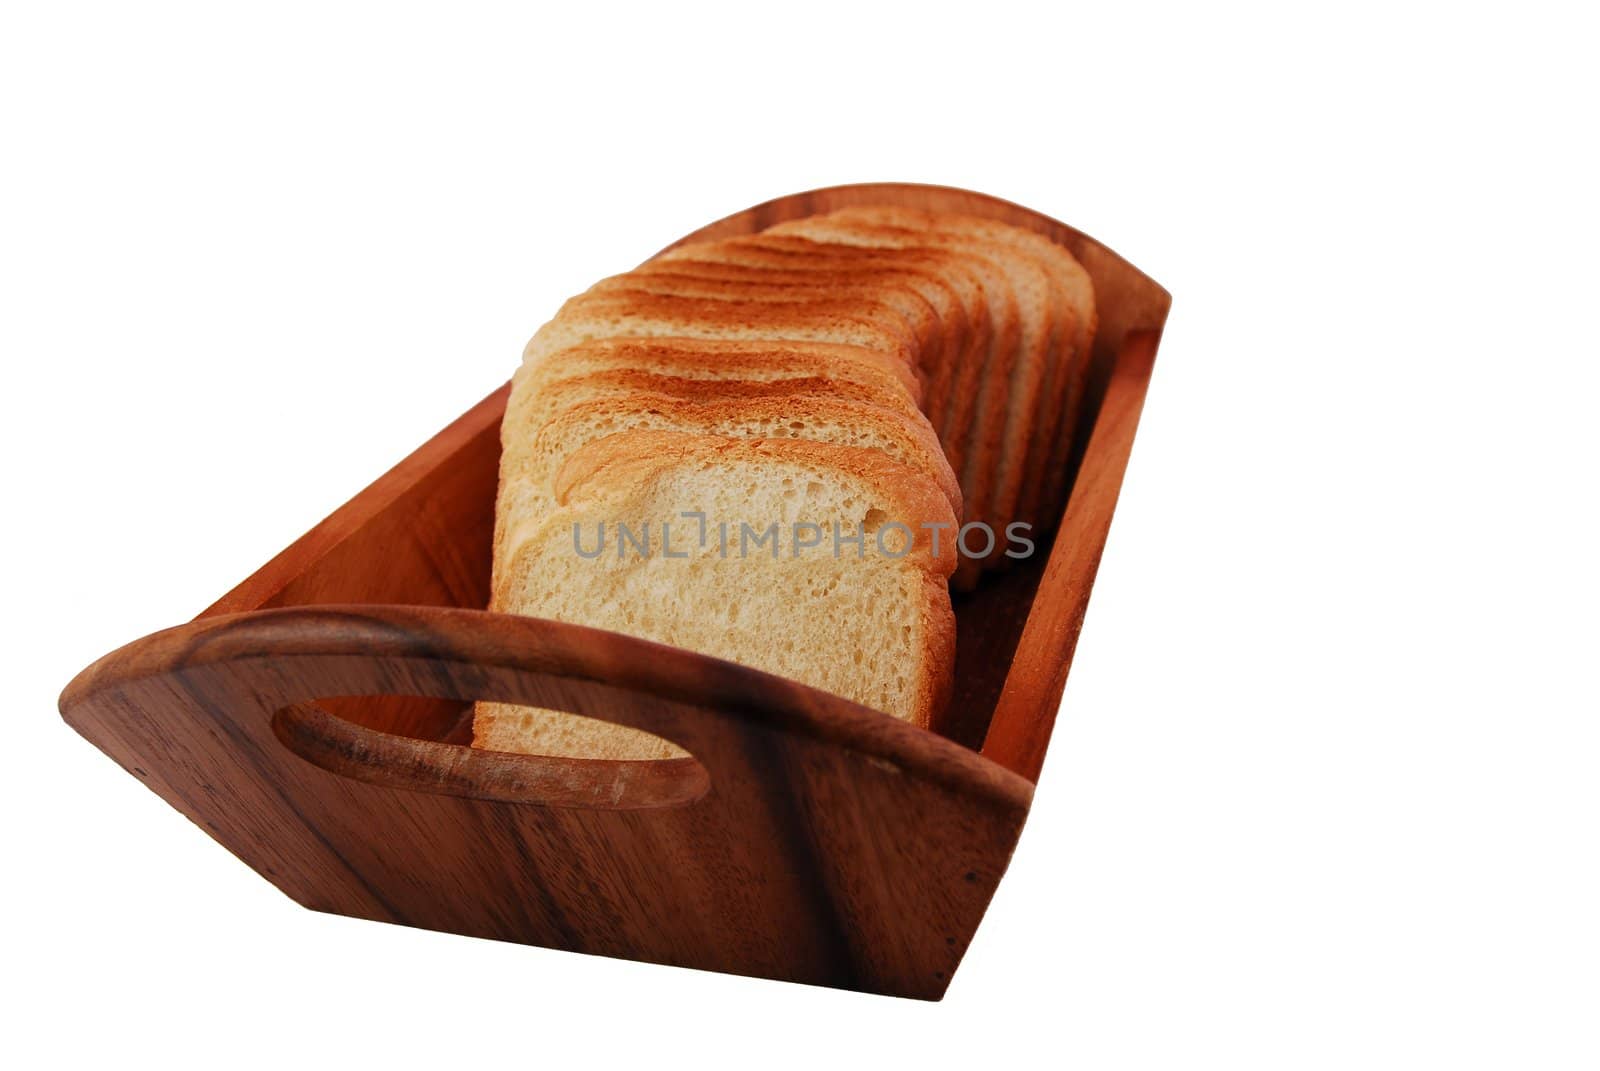 bread slices in wooden bowl